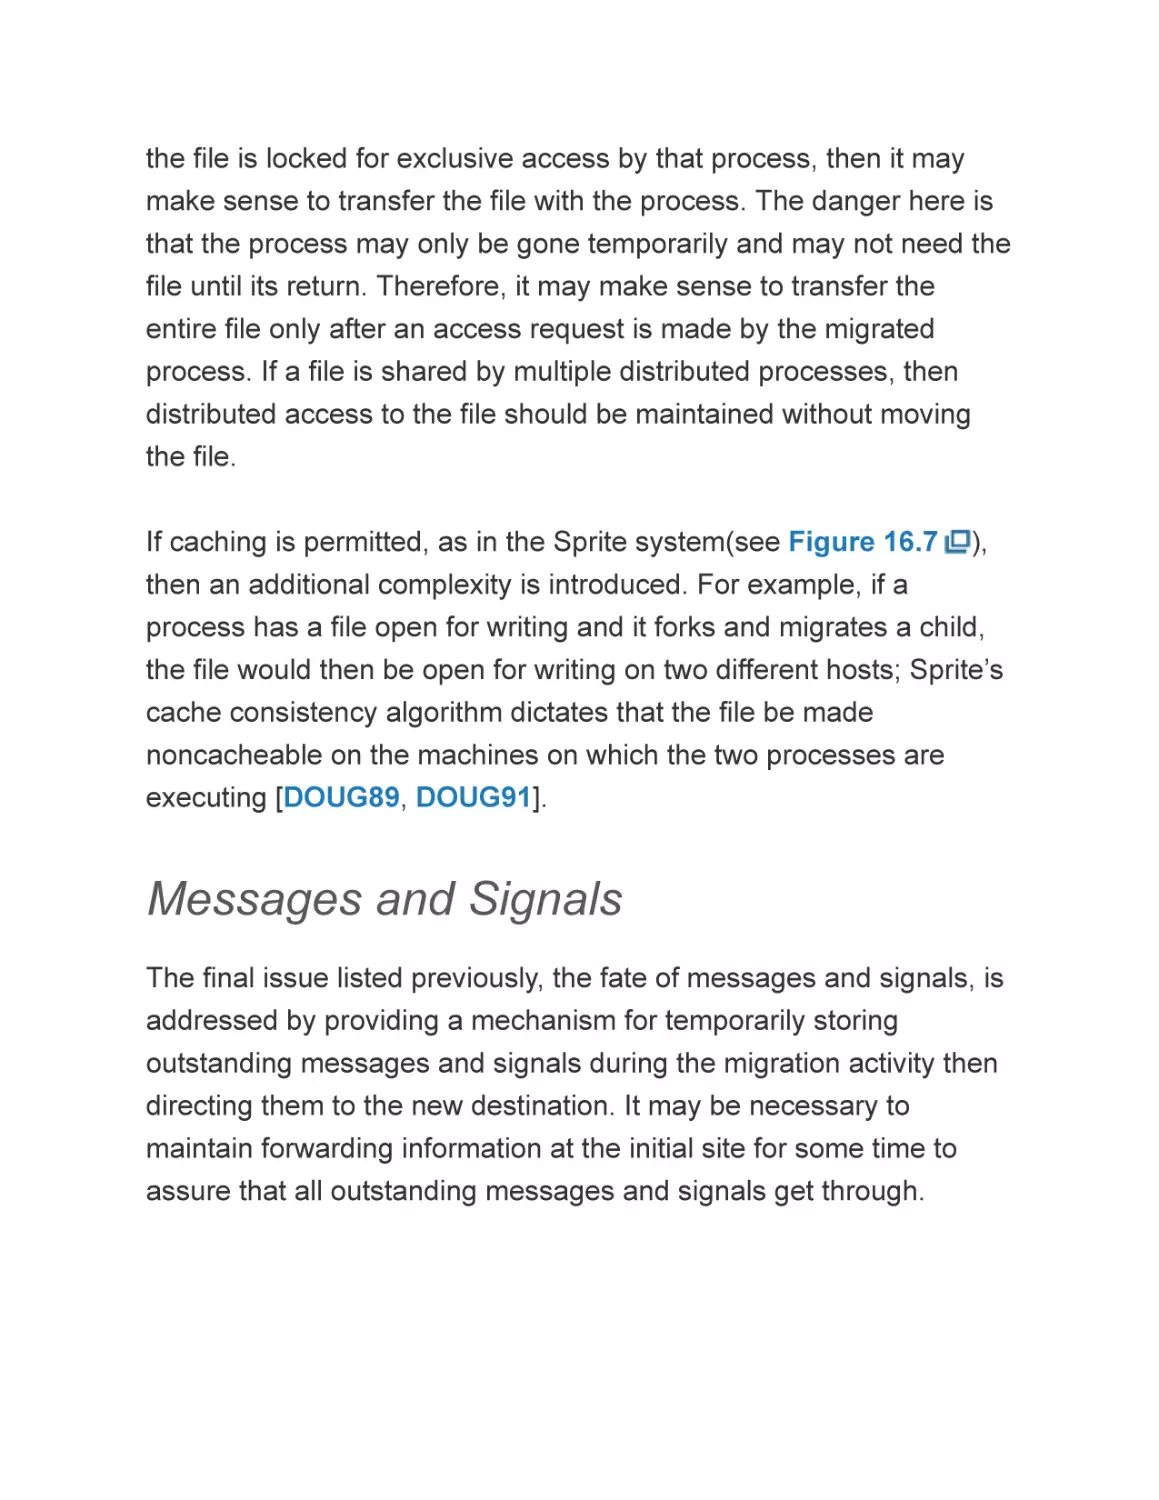 Messages and Signals